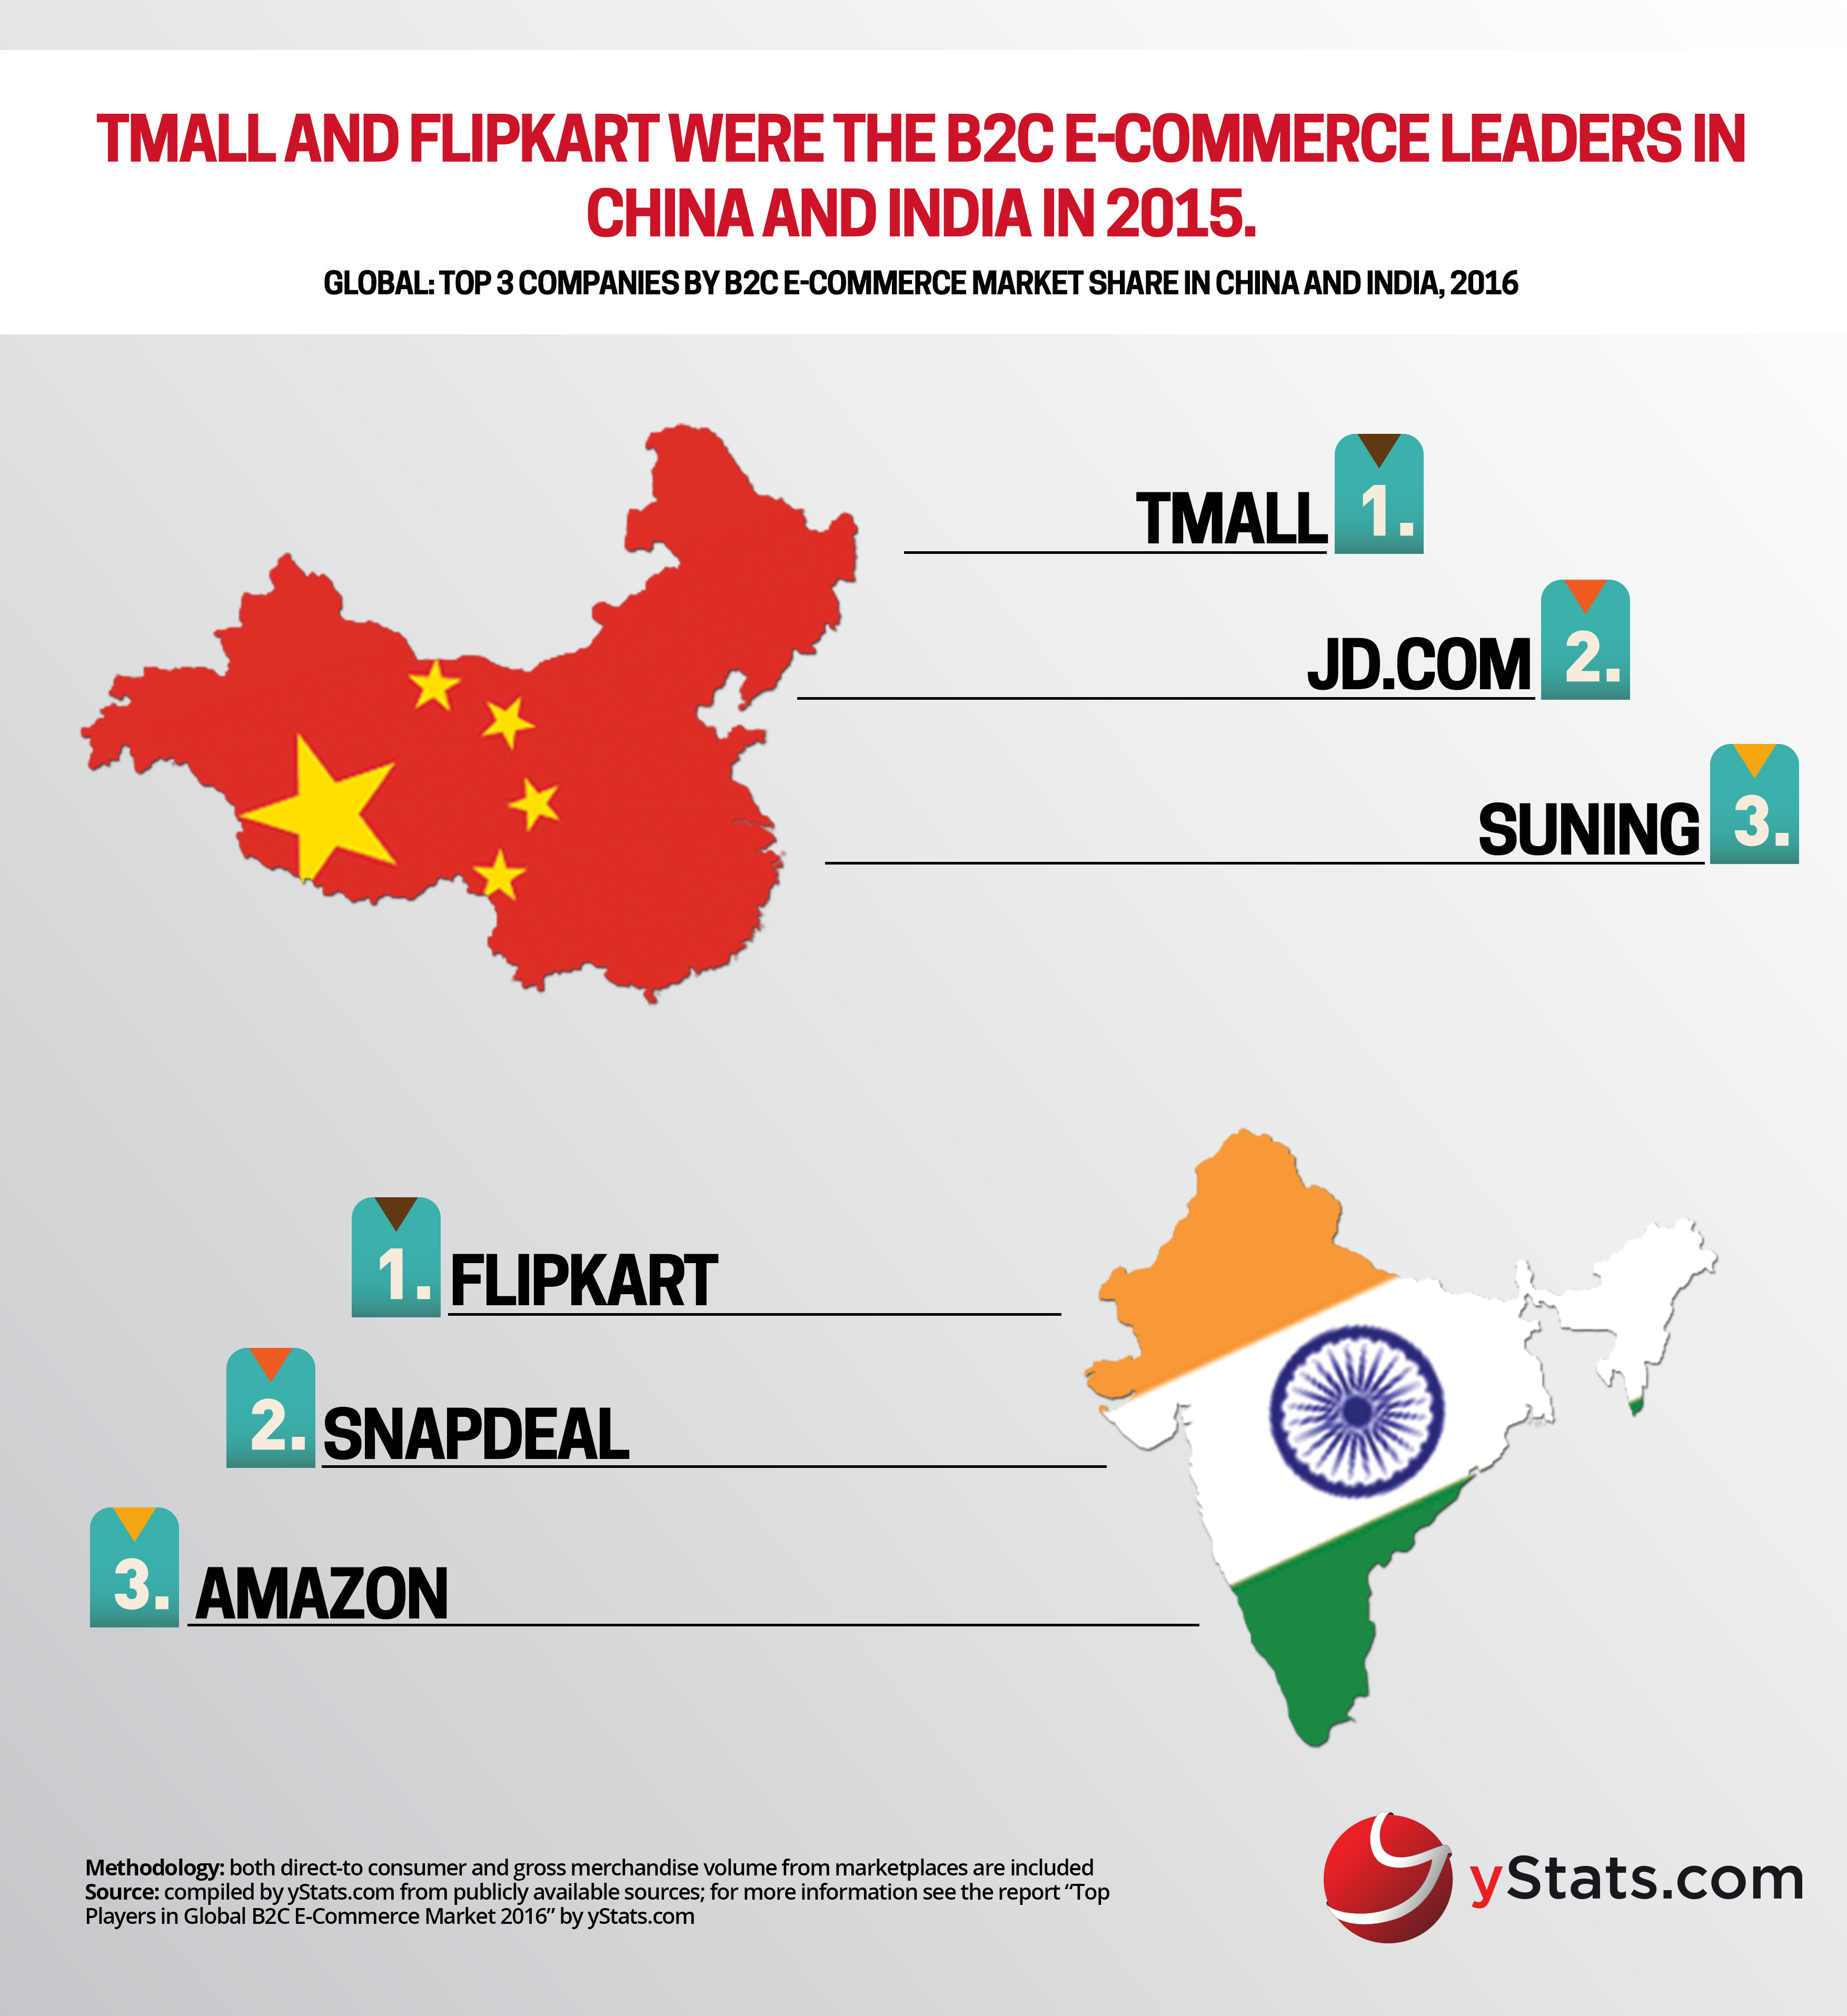 top companies by B2C E-Commerce Market share in india and china